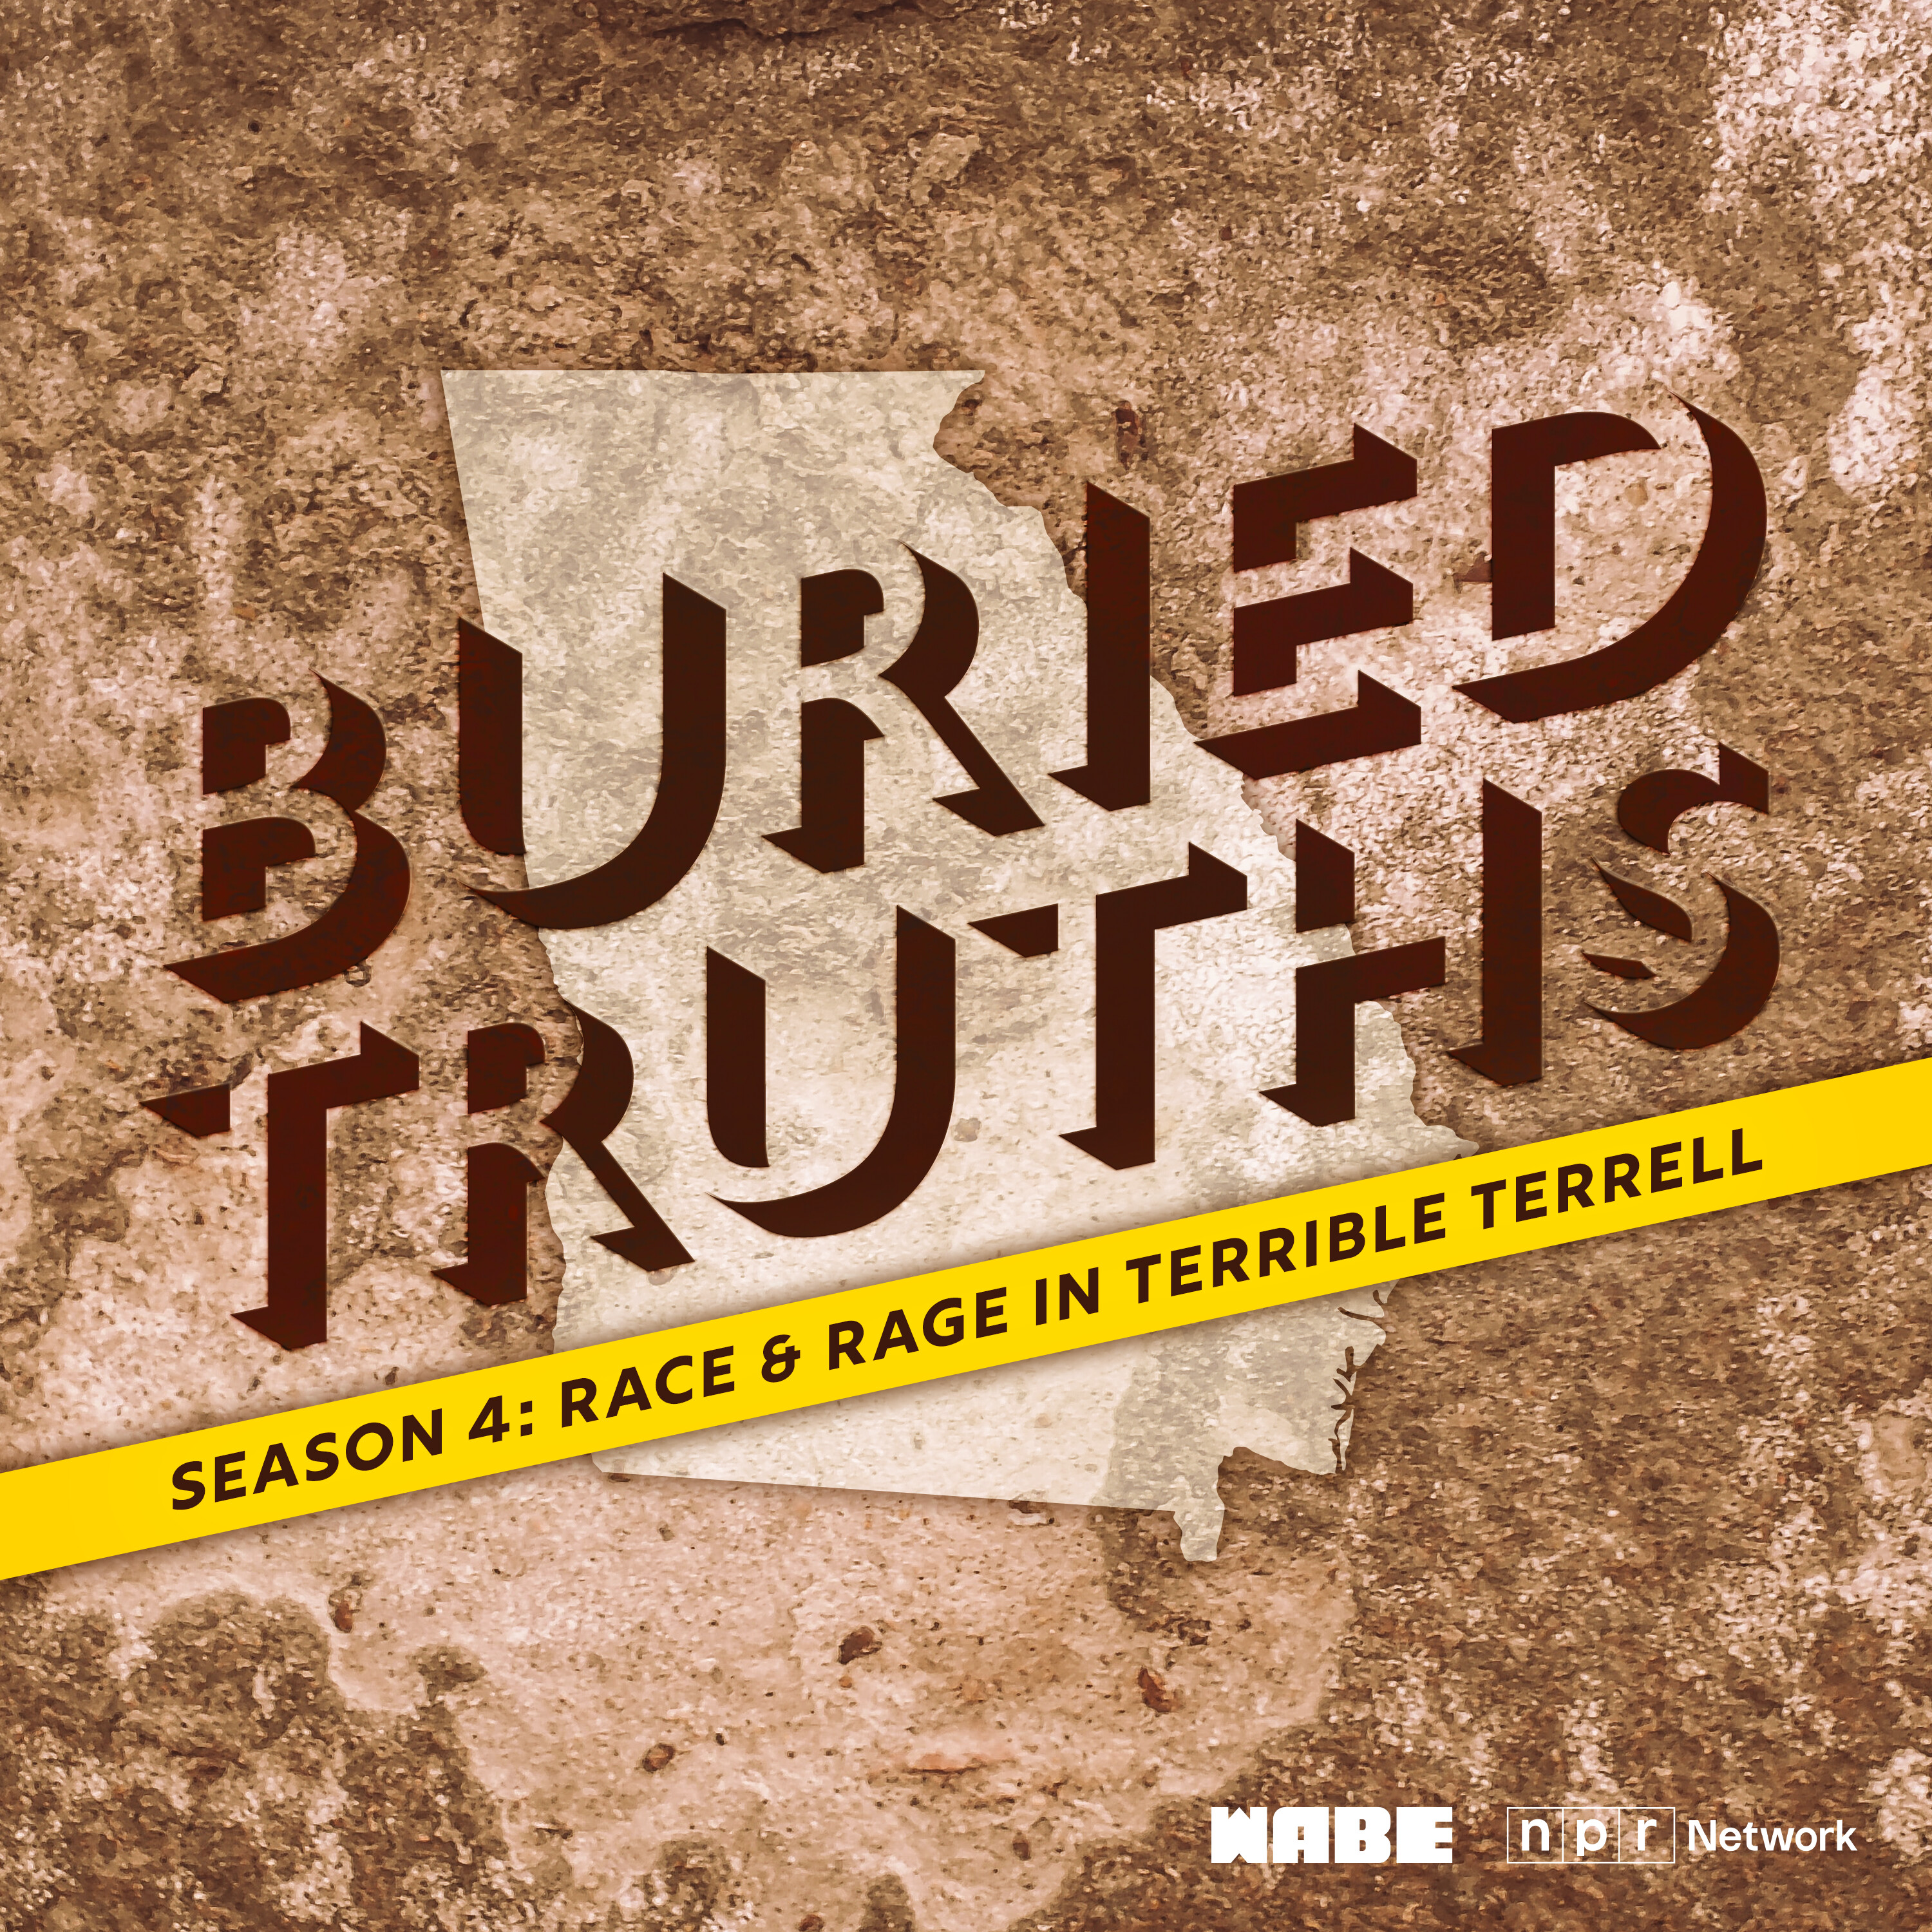 Buried Truths podcast